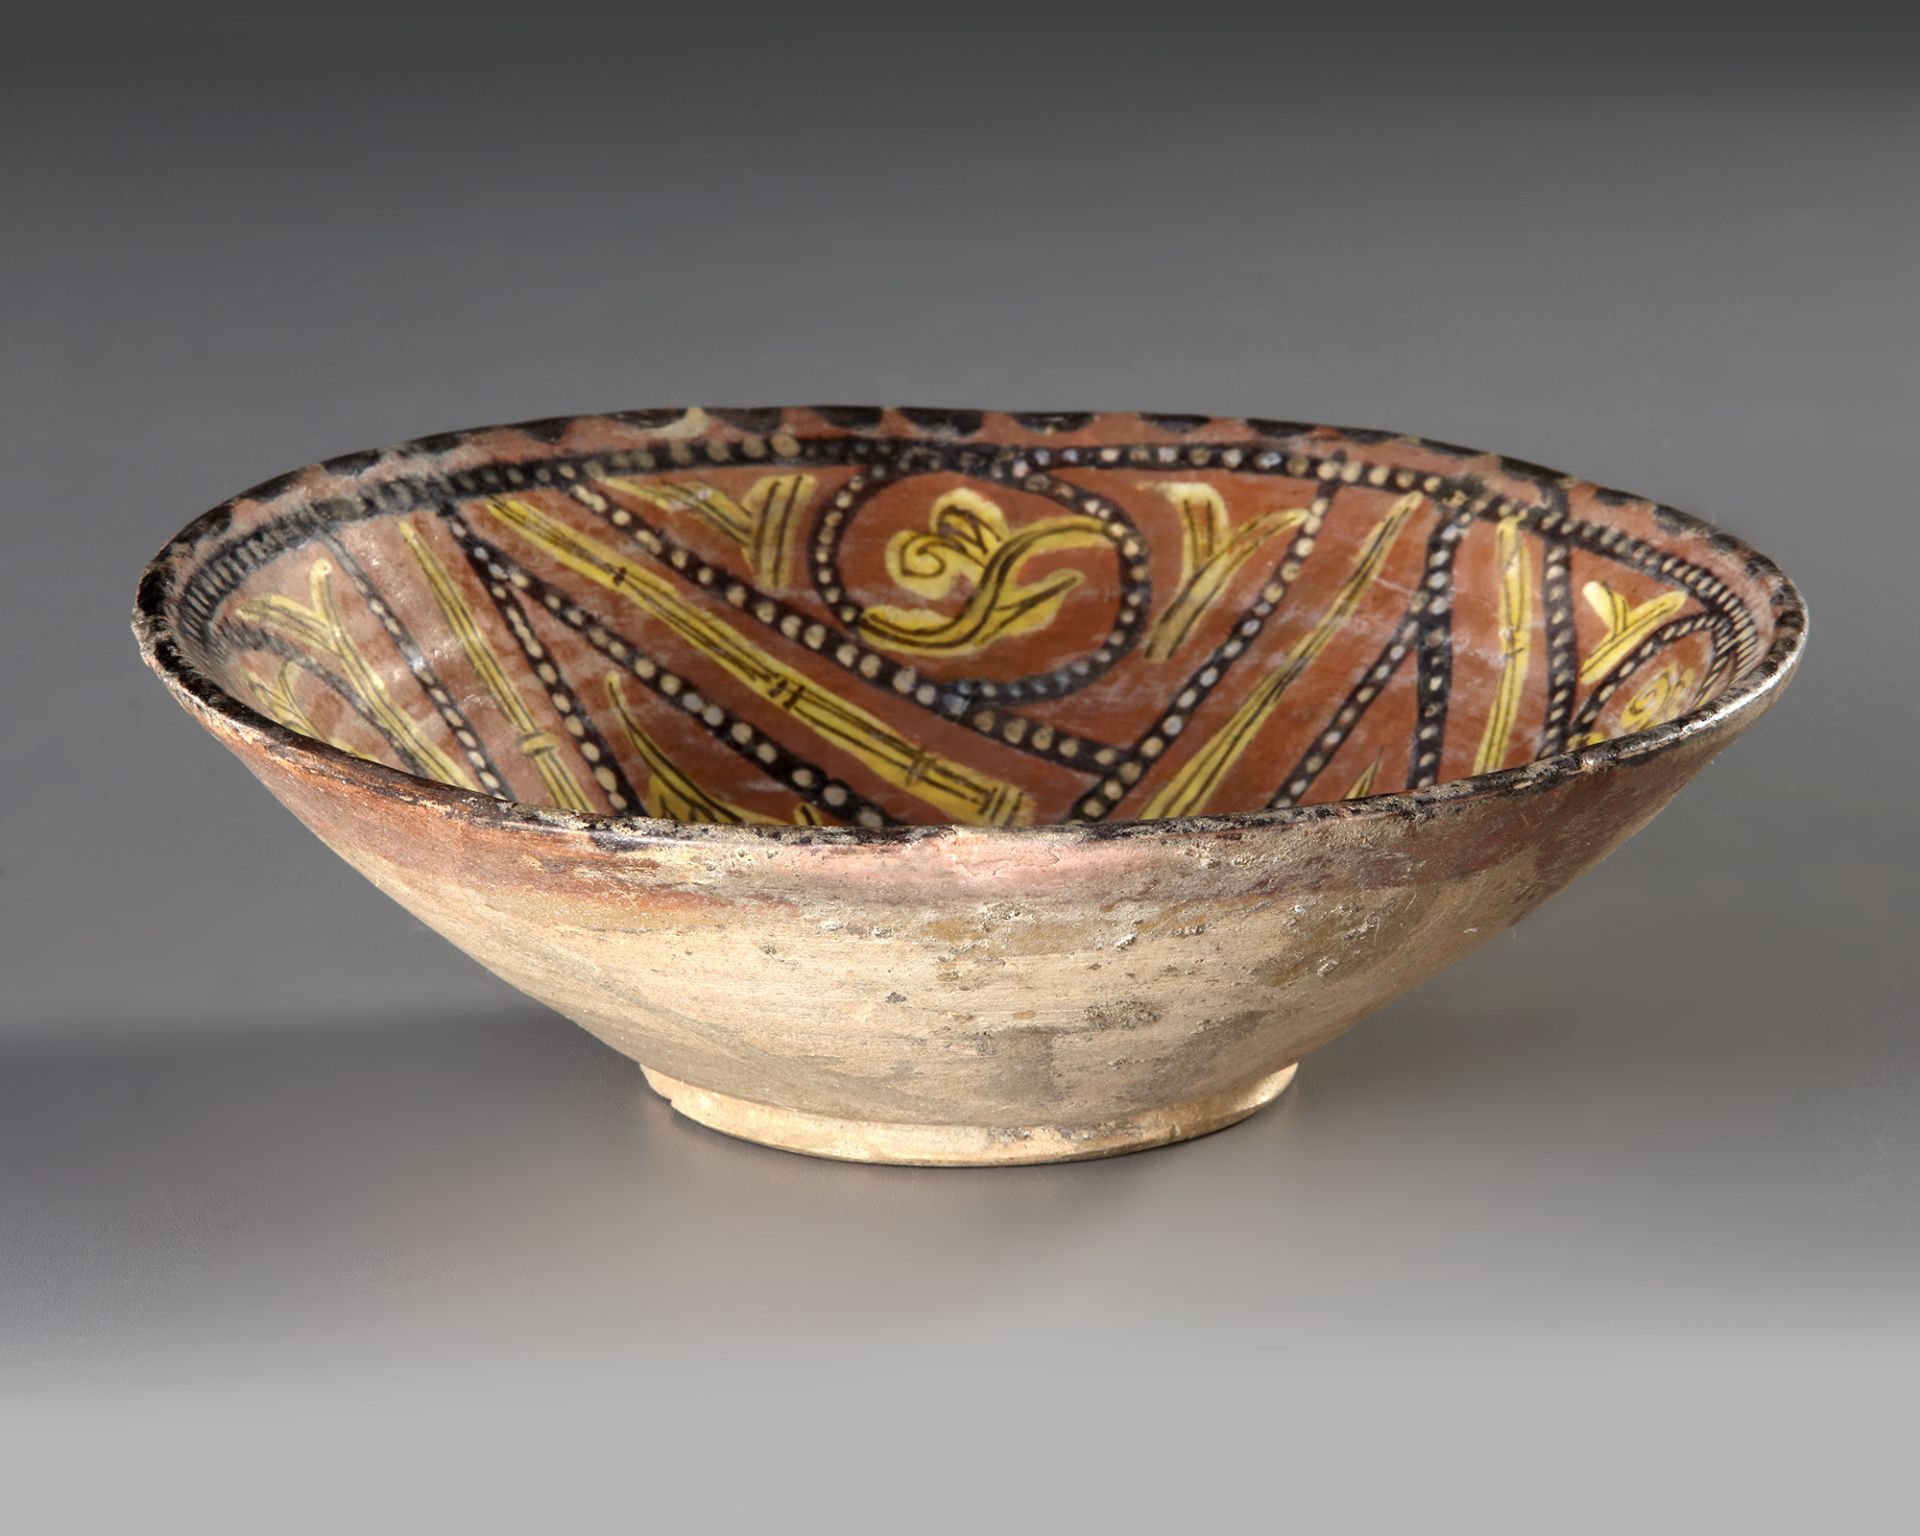 A NISHAPUR CONICAL POTTERY BOWL, PERSIA, 10TH CENTURY - Image 2 of 5